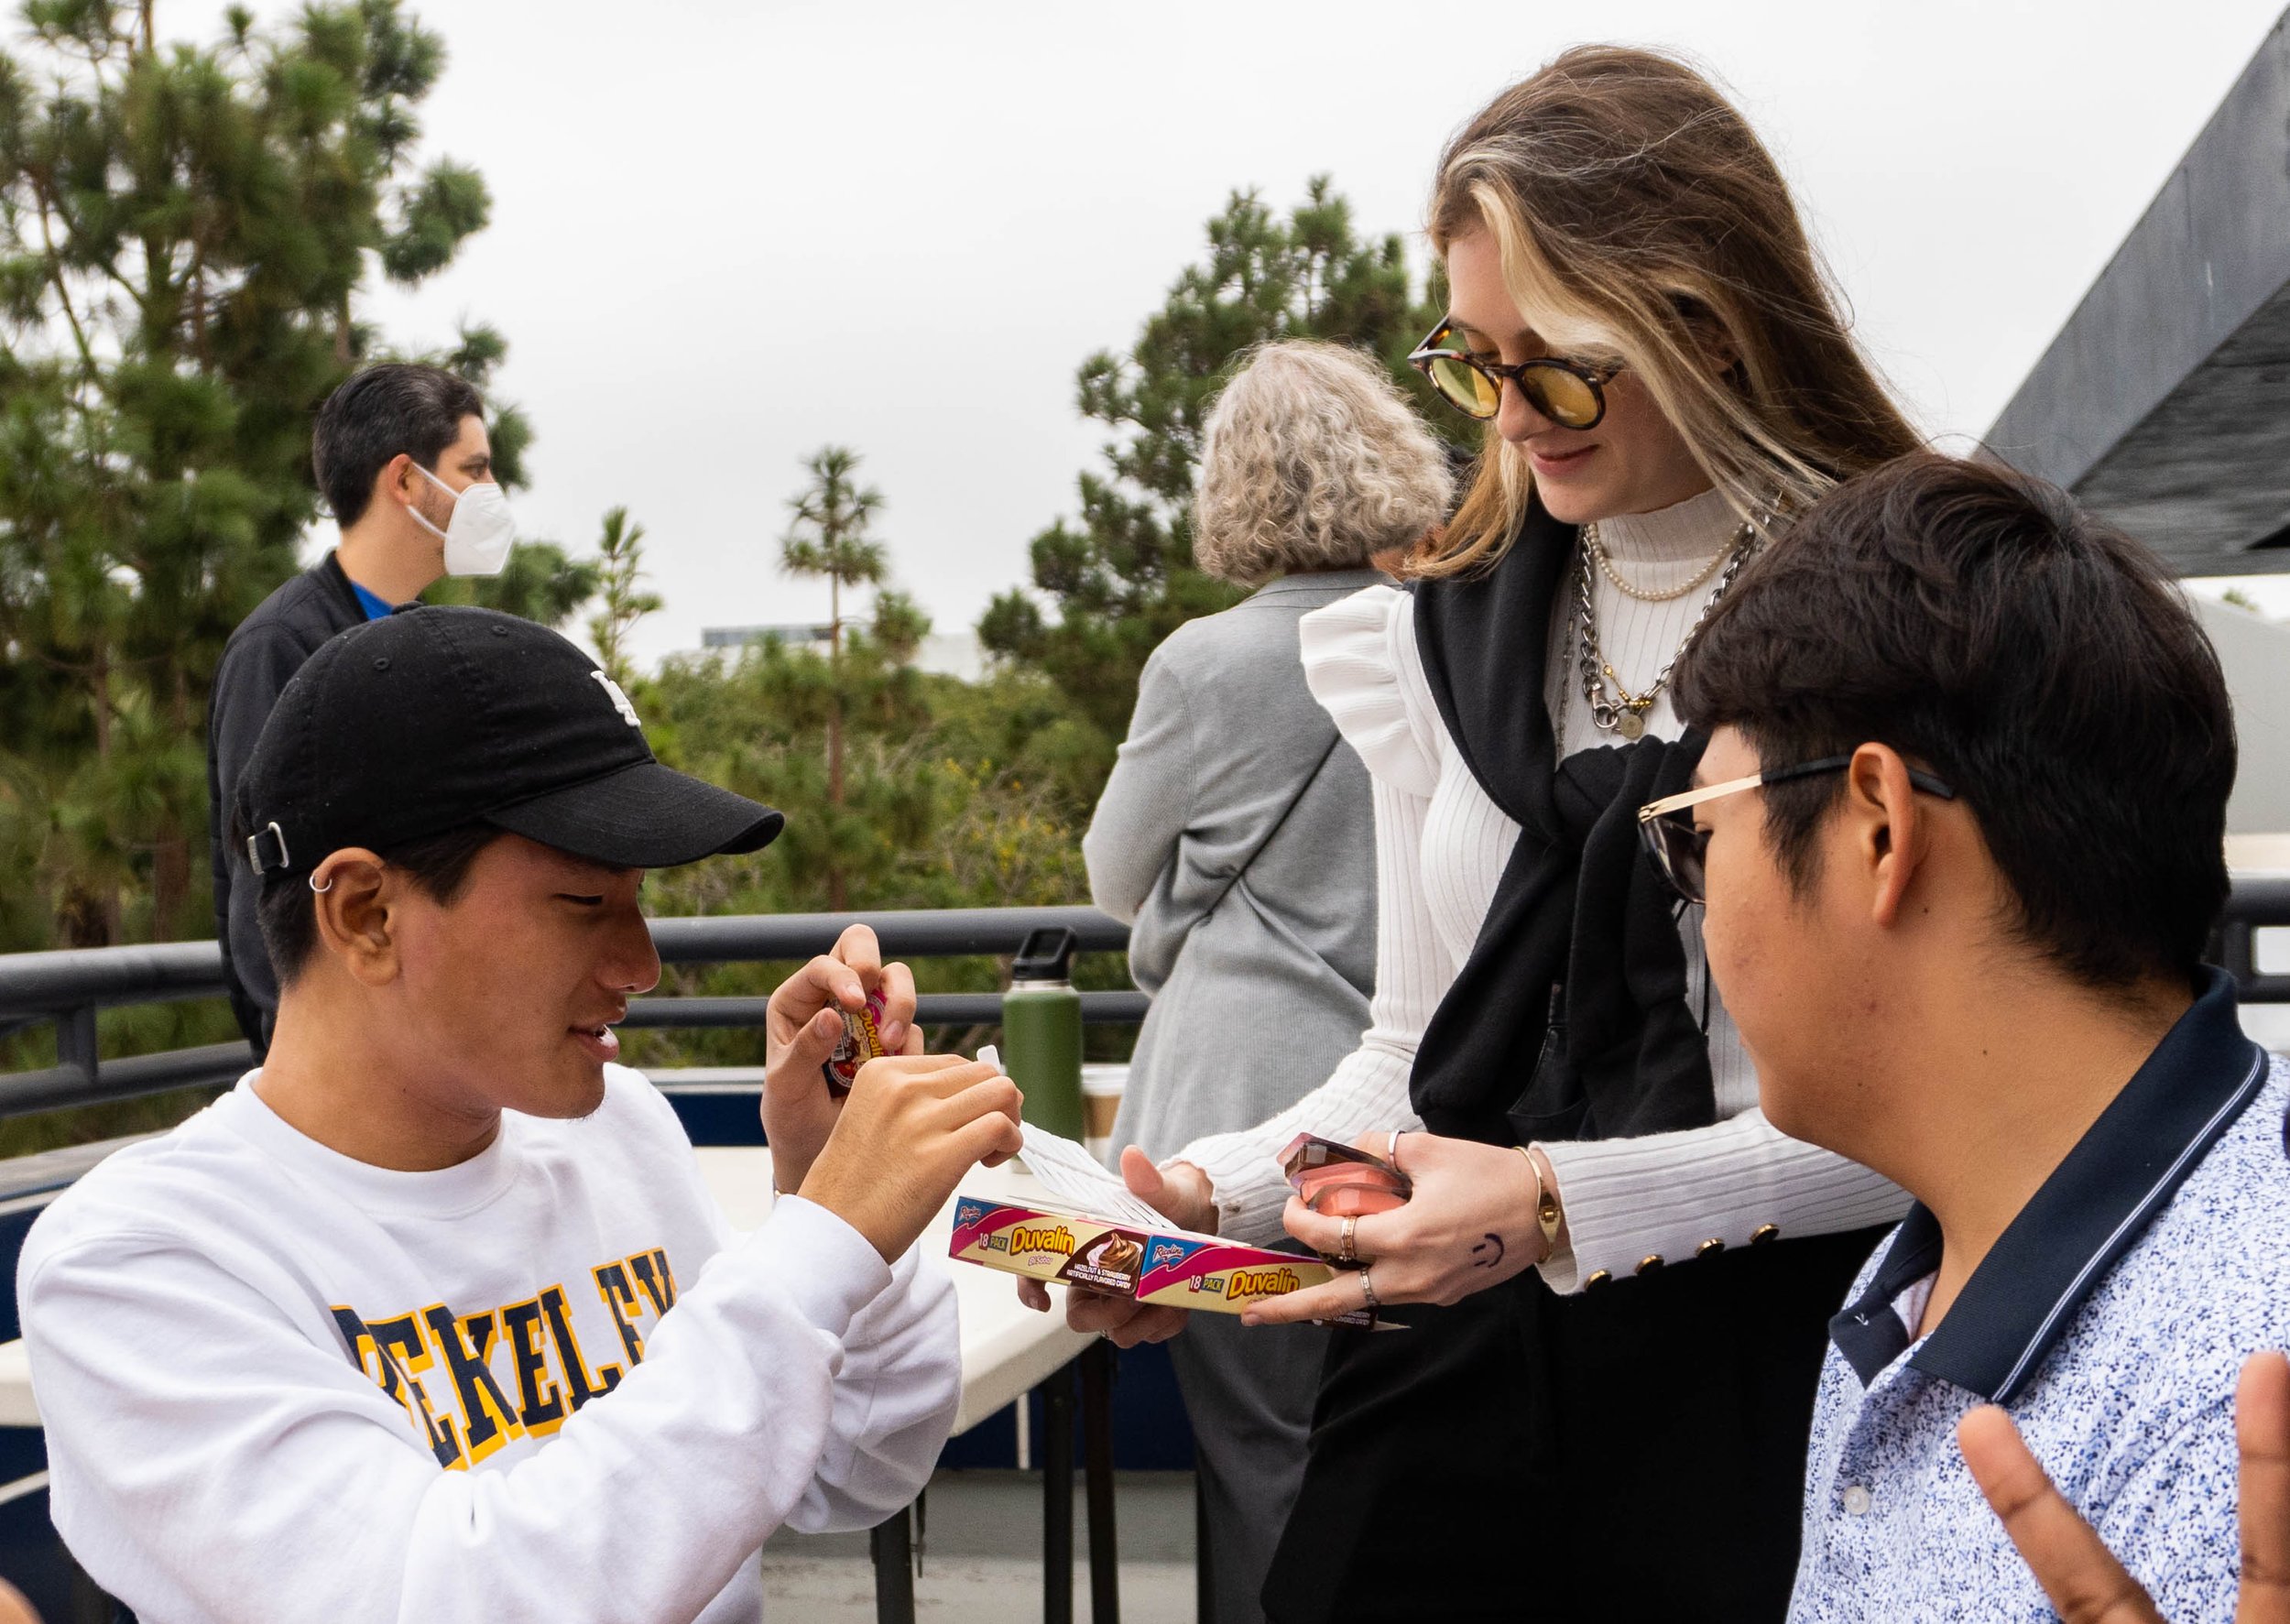  Santa Monica College International Student Forum (ISF) members, Traves Lee, Andrea Giraldo and Oscar Chien try Duvalin, a Mexican hazelnut and vanilla flavored candy during ISF's Snacks Appreciation Day on Oct. 5, 2022. Santa Monica, Calif. (Ee Lin 